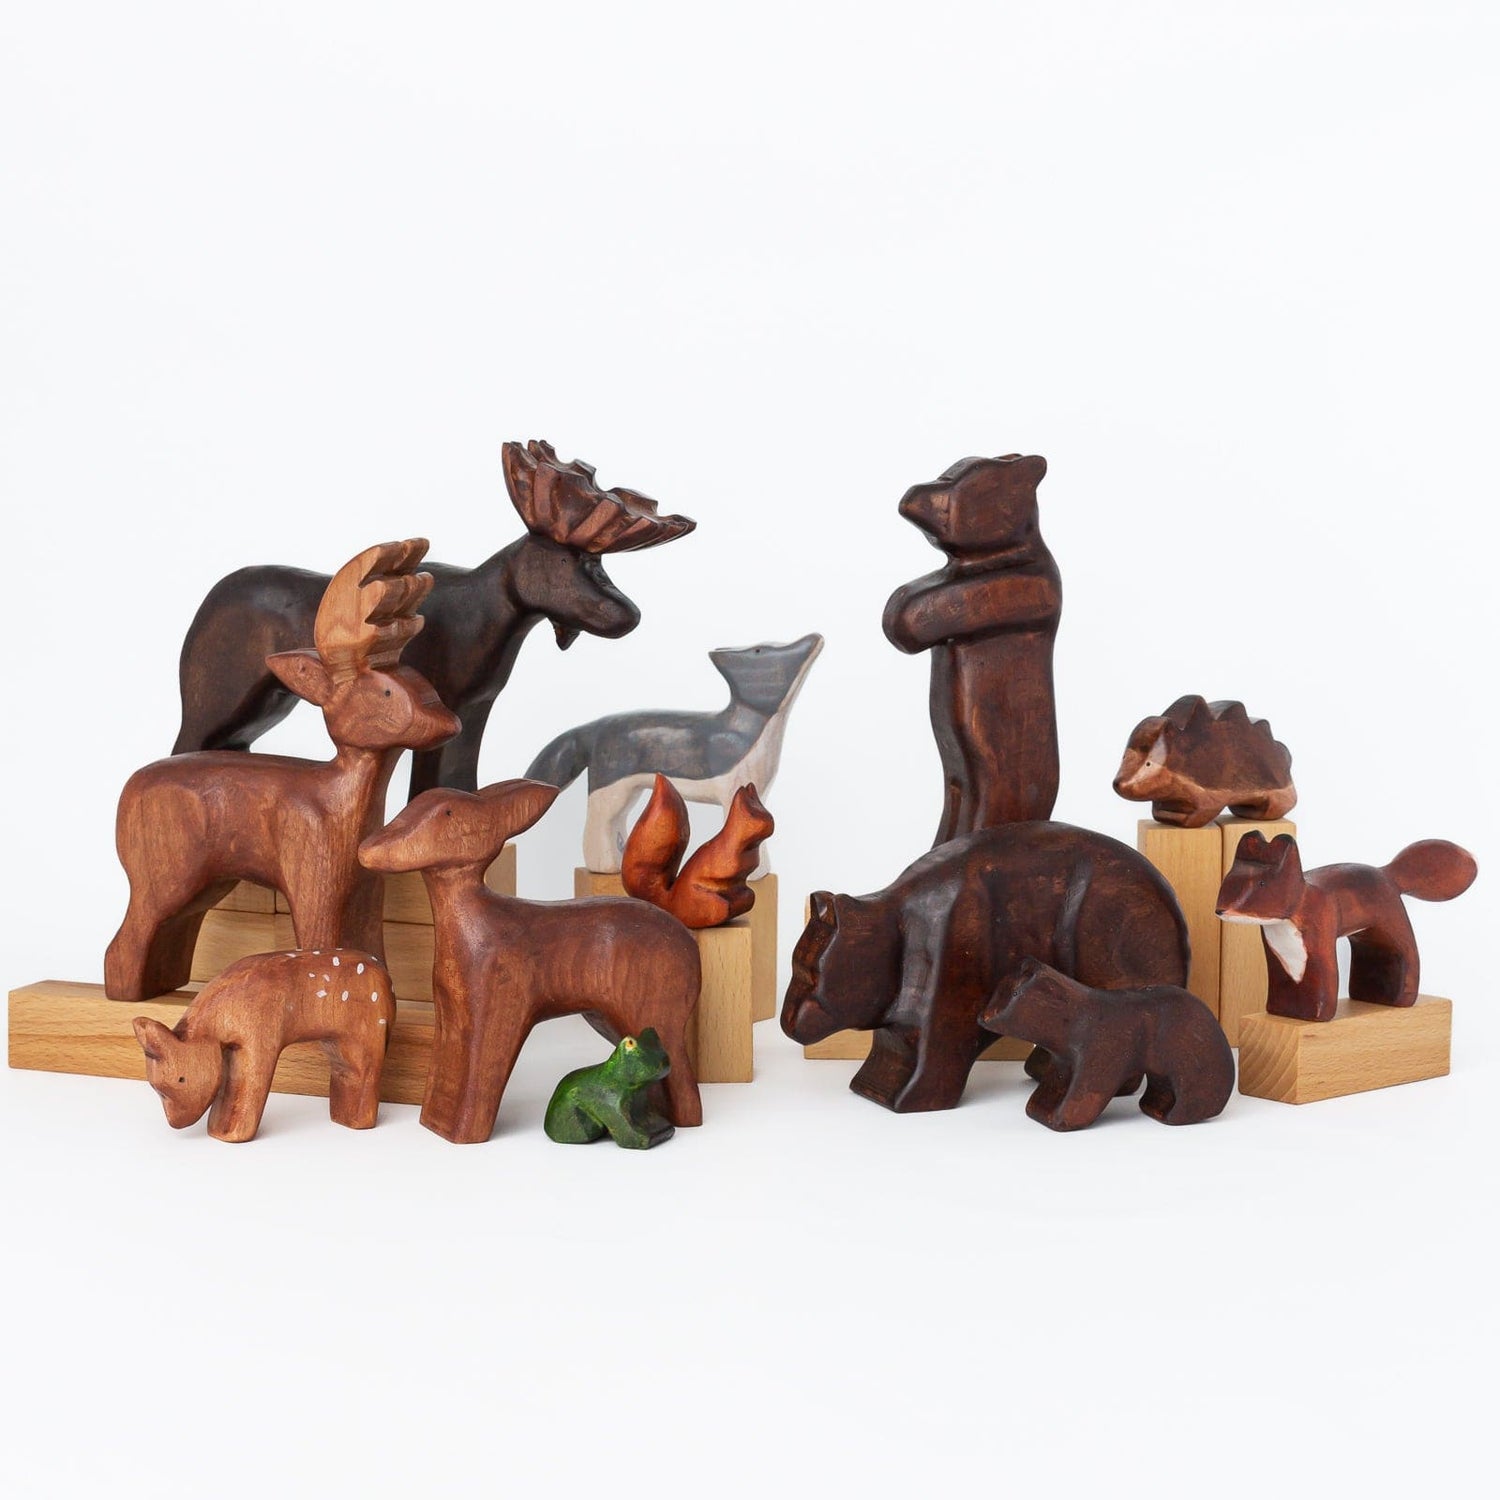 Bumbleberry Toys Wooden Animals 'Sir Noot Squirrel" Wooden Animal Toy (Handmade in Canada)